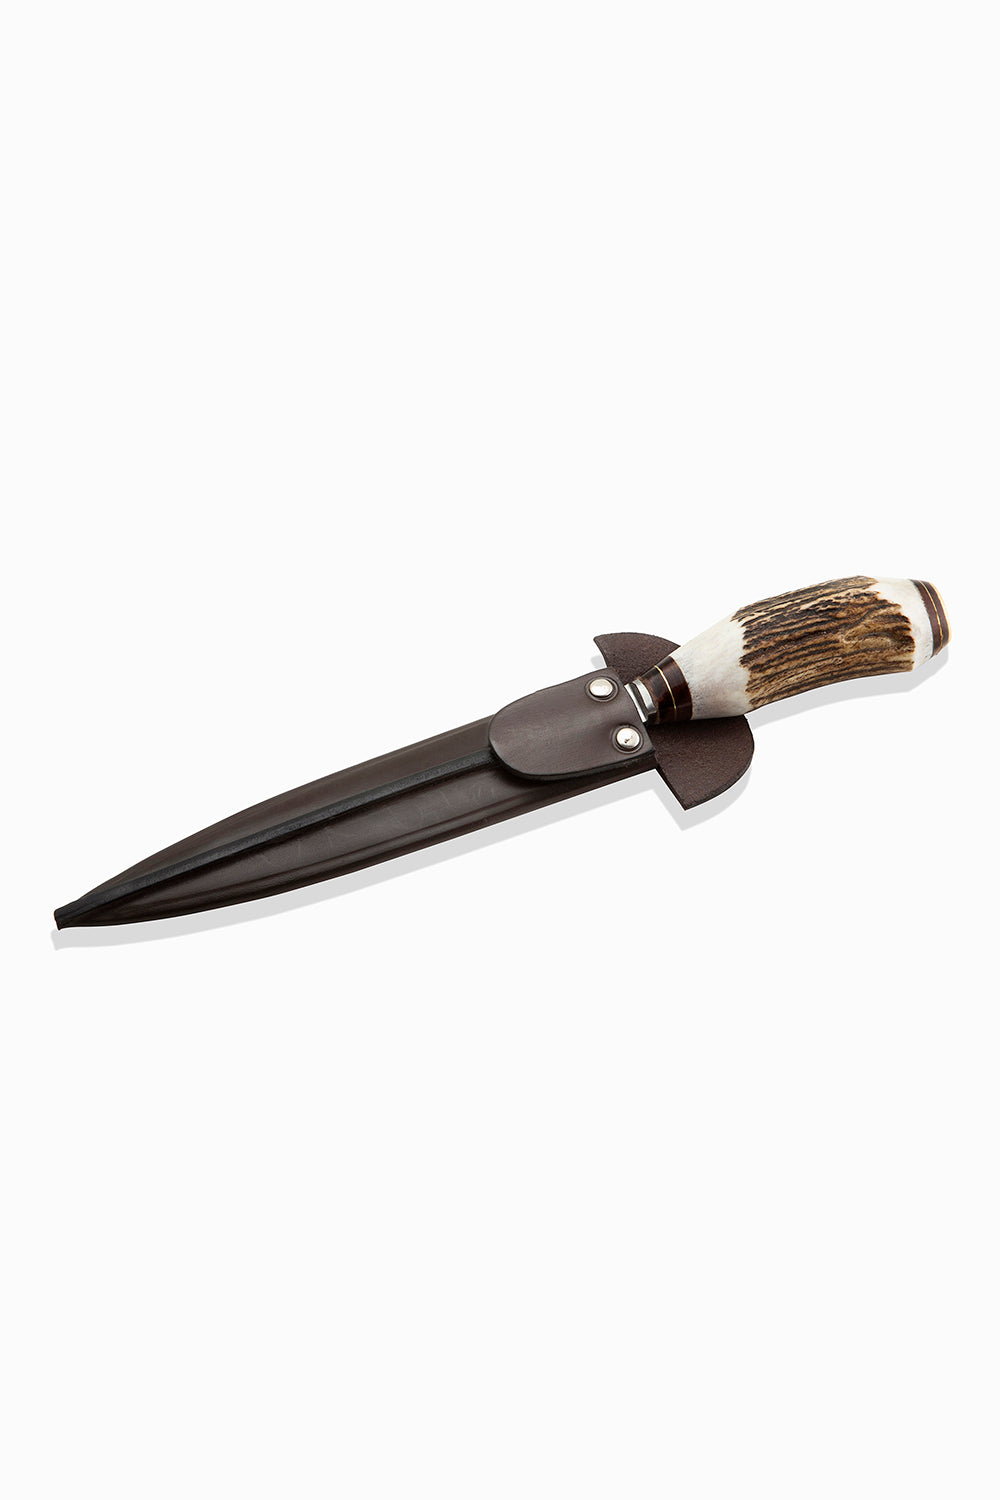 Gaucho Casa Tandil Gaucho Knife With Deer Horn Handle and Stainless-Steel Blade